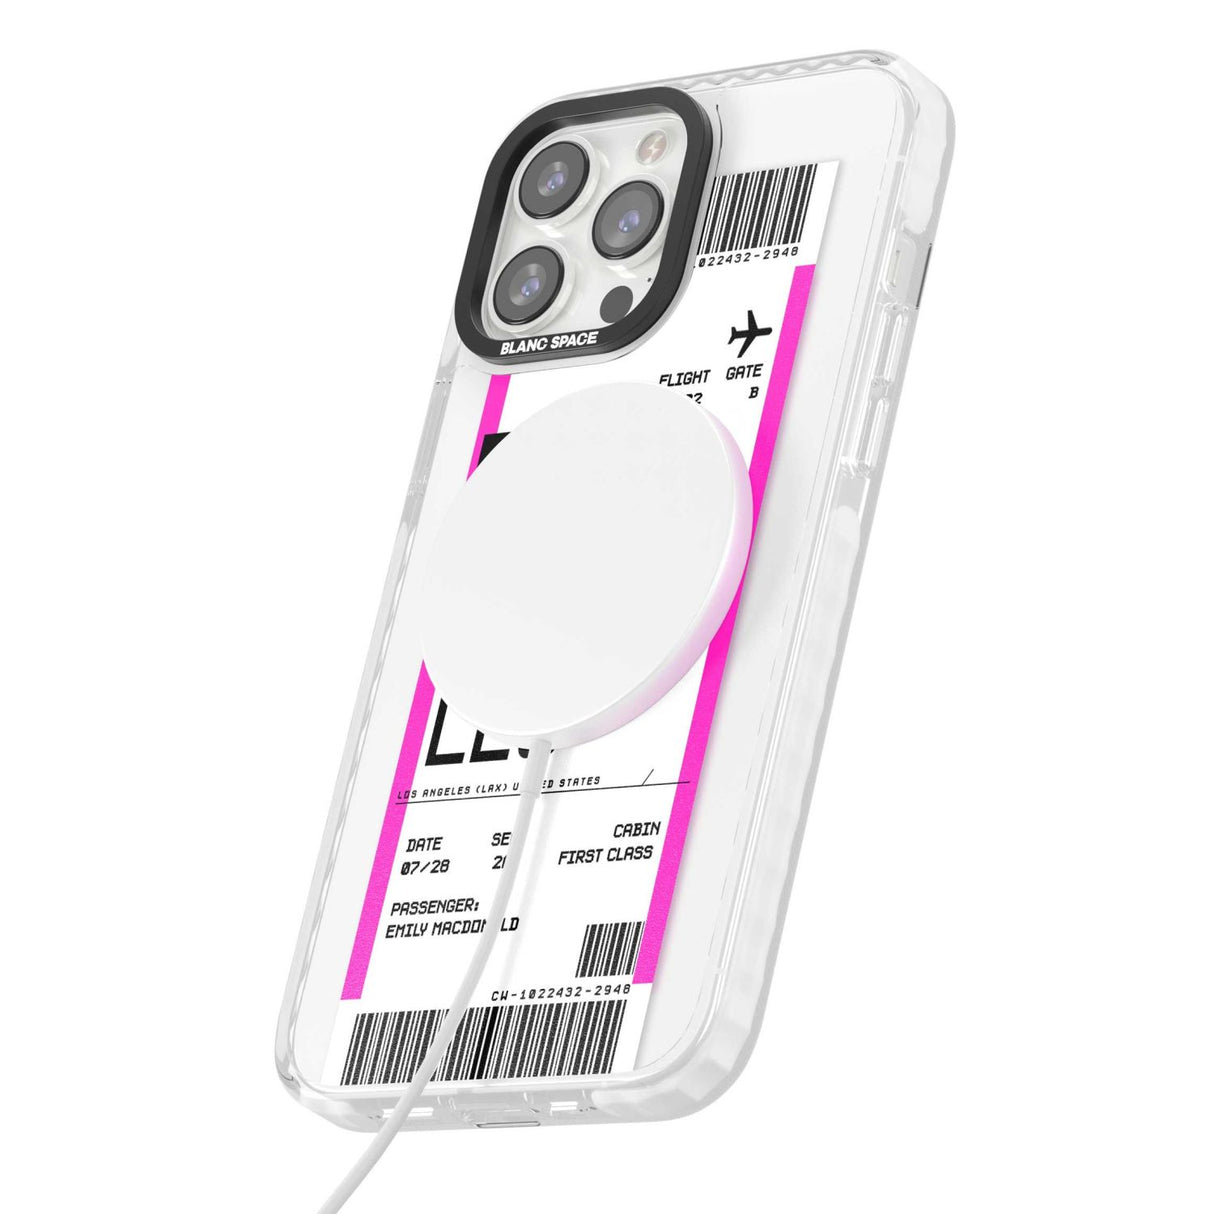 Personalised Los Angeles Boarding Pass